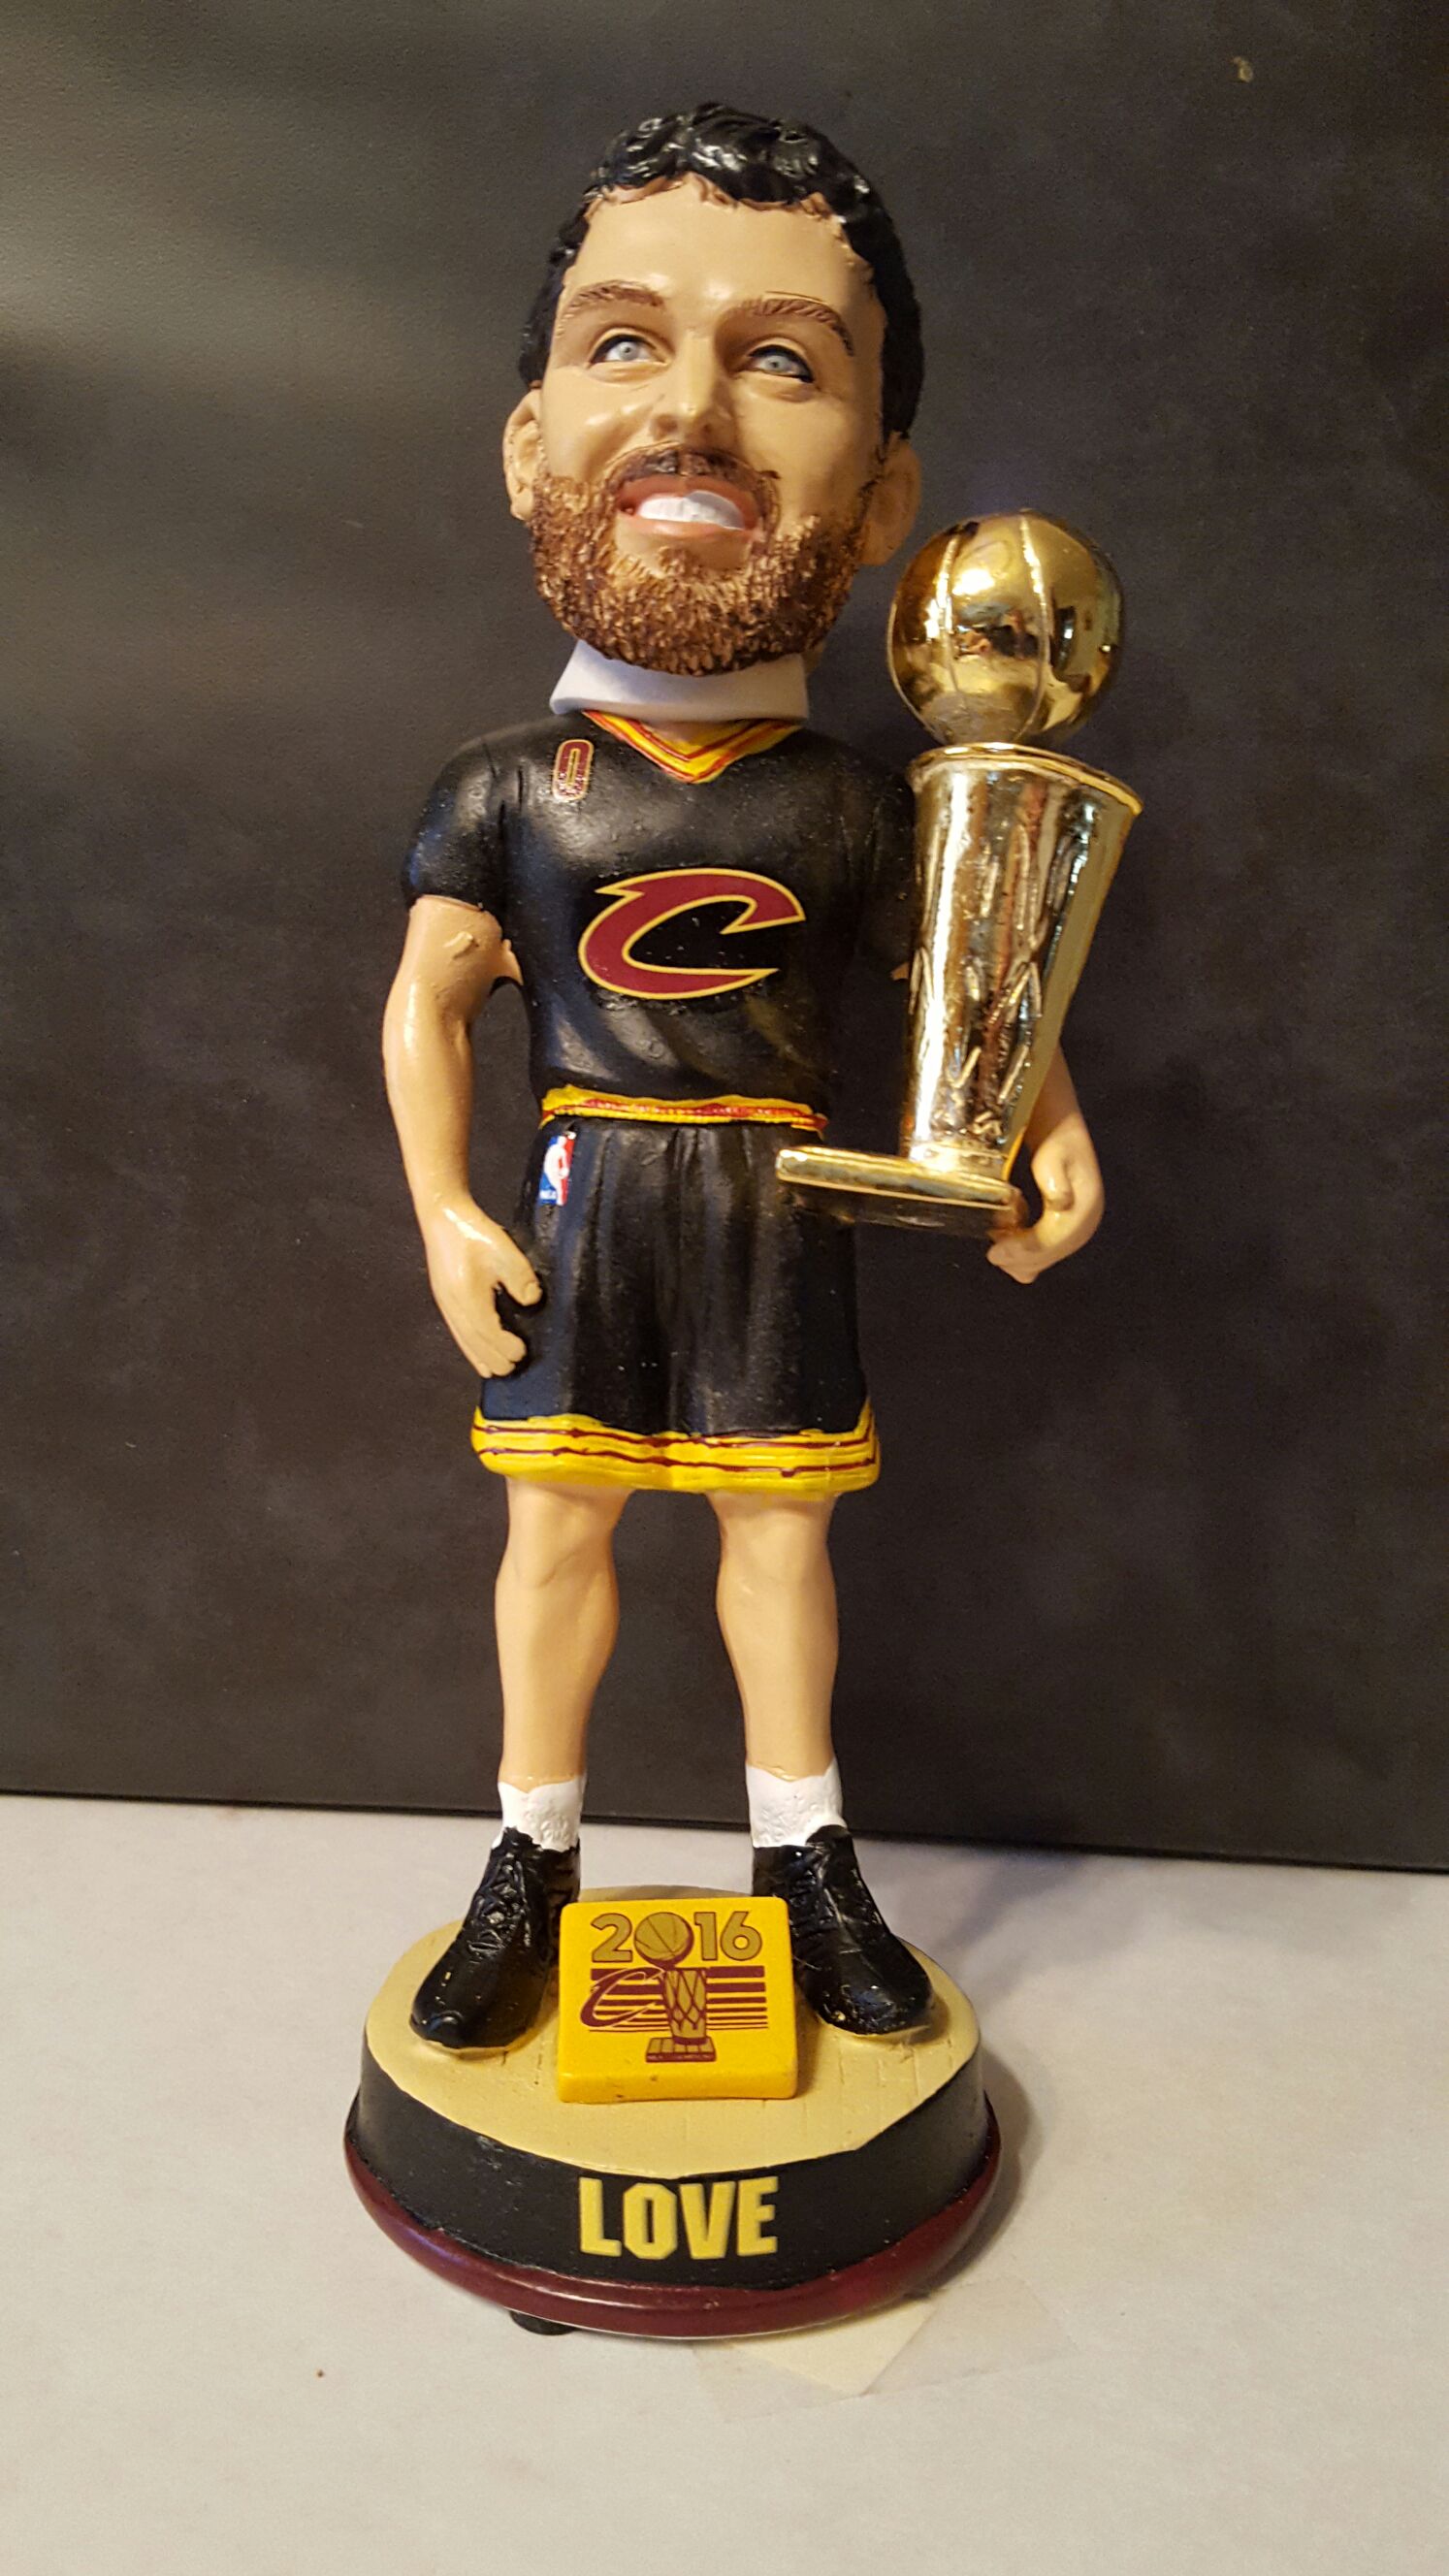 Cavs 2016 giant eagle Kevin Love  bobblehead collectible [Barcode 190163858775] - Main Image 1